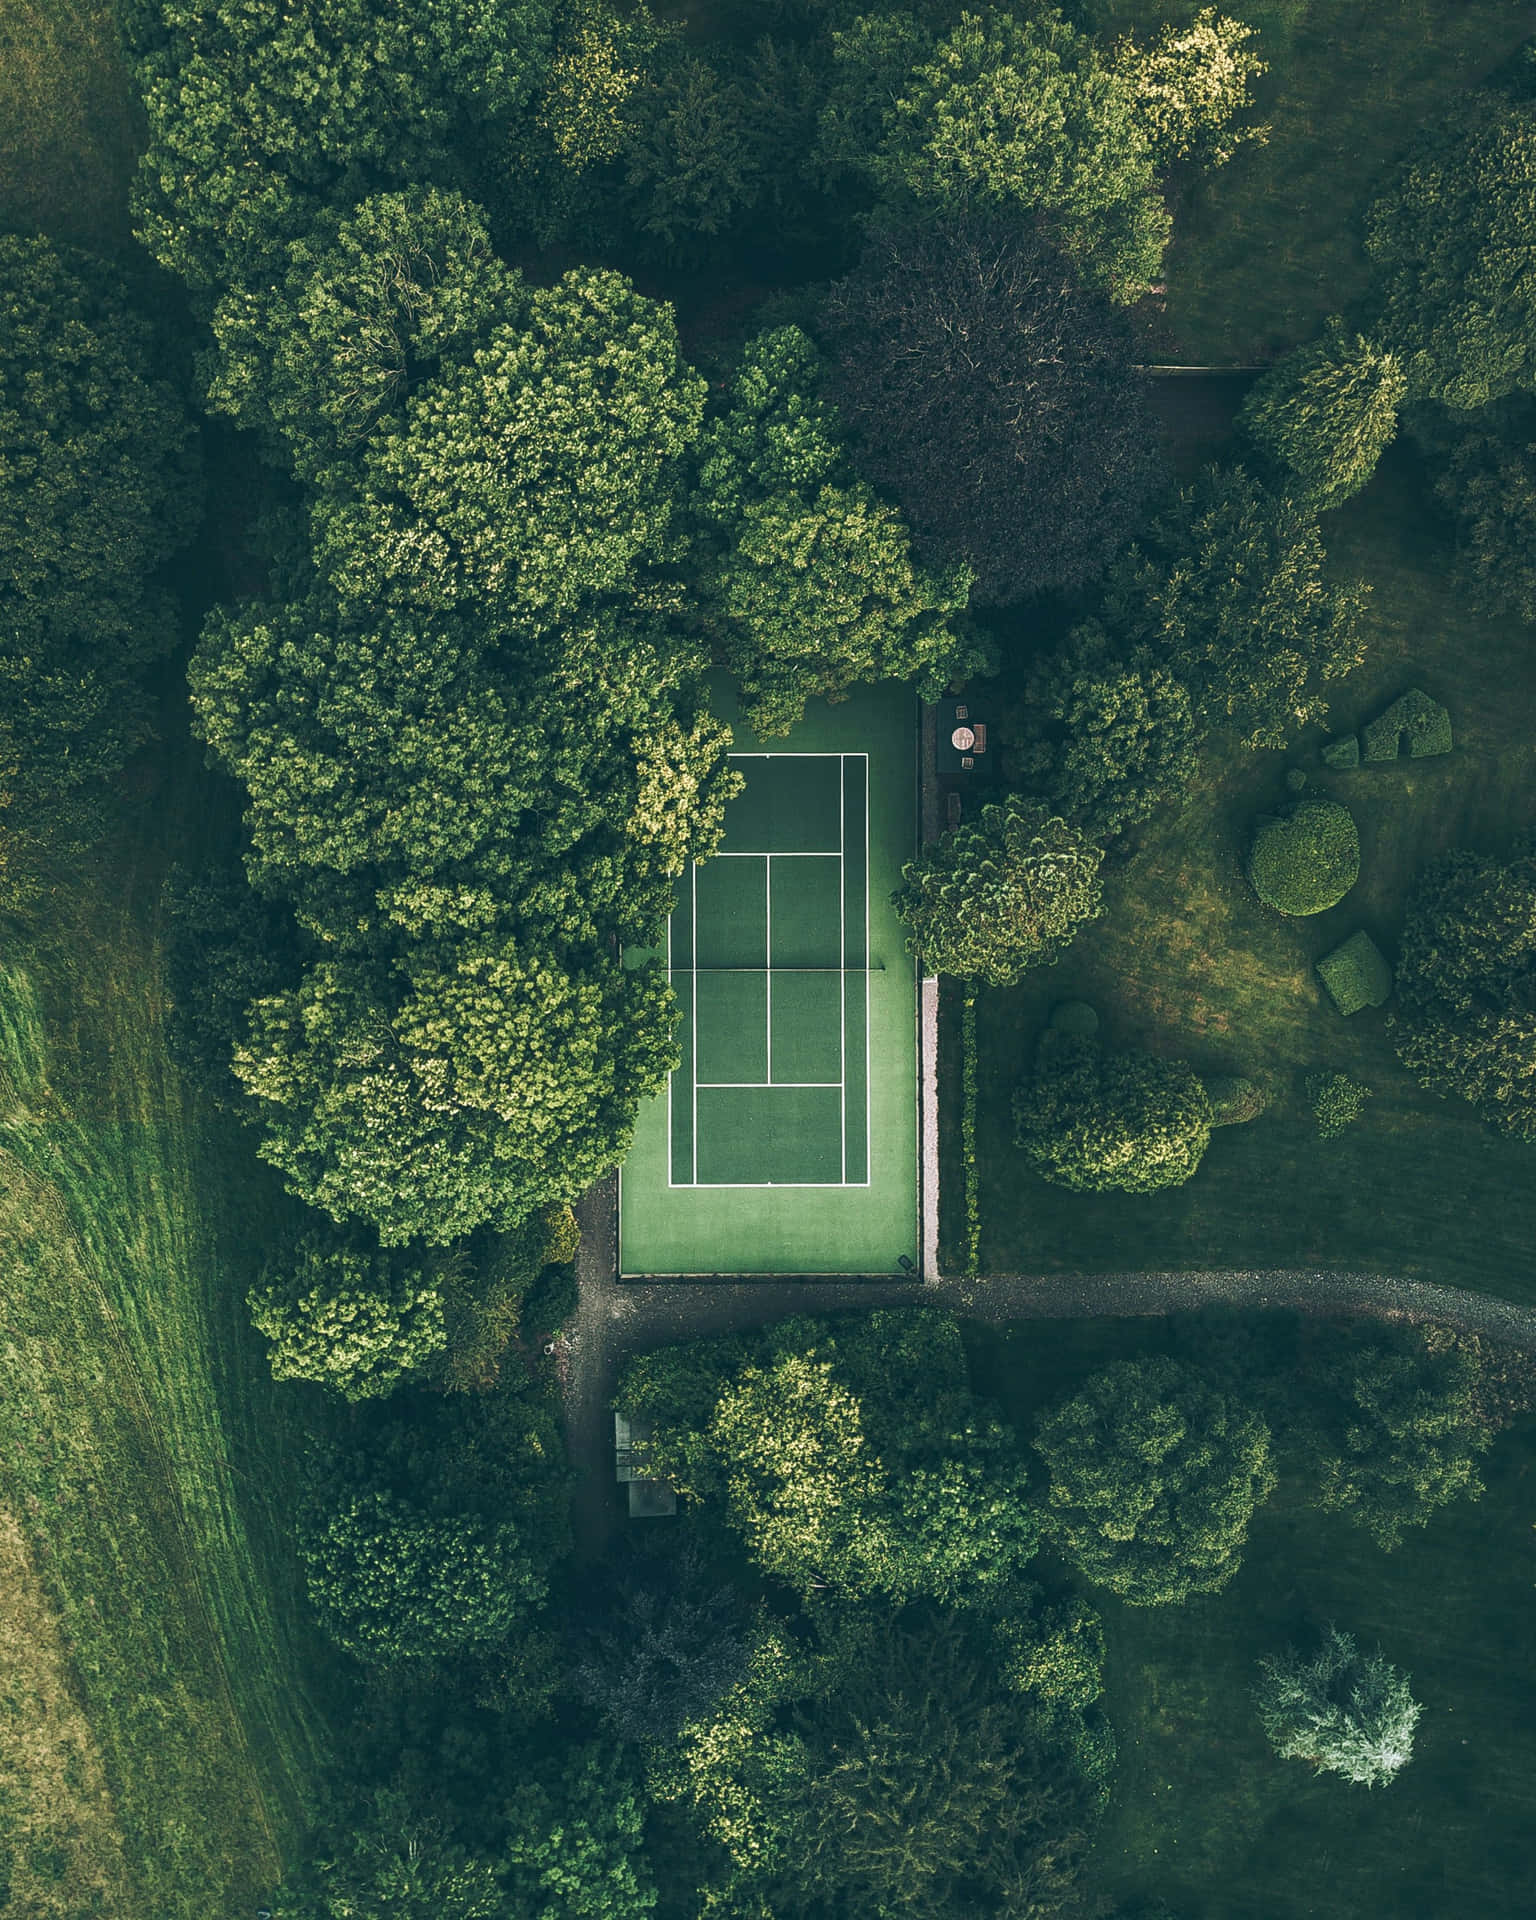 A Tennis Court In The Middle Of A Green Field